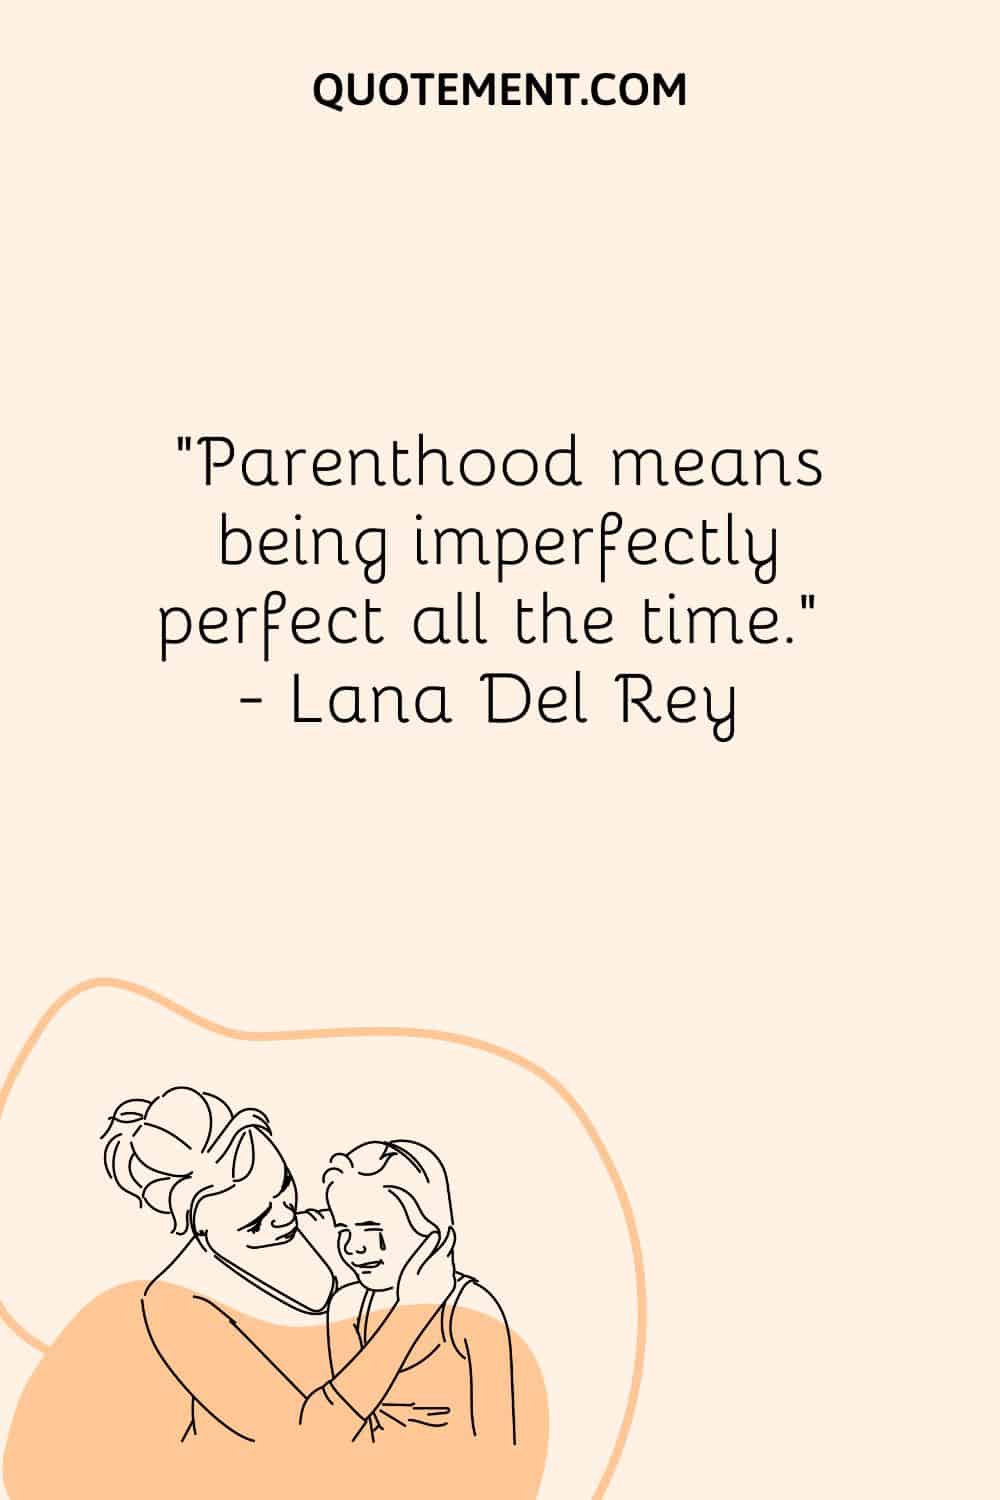 Parenthood means being imperfectly perfect all the time